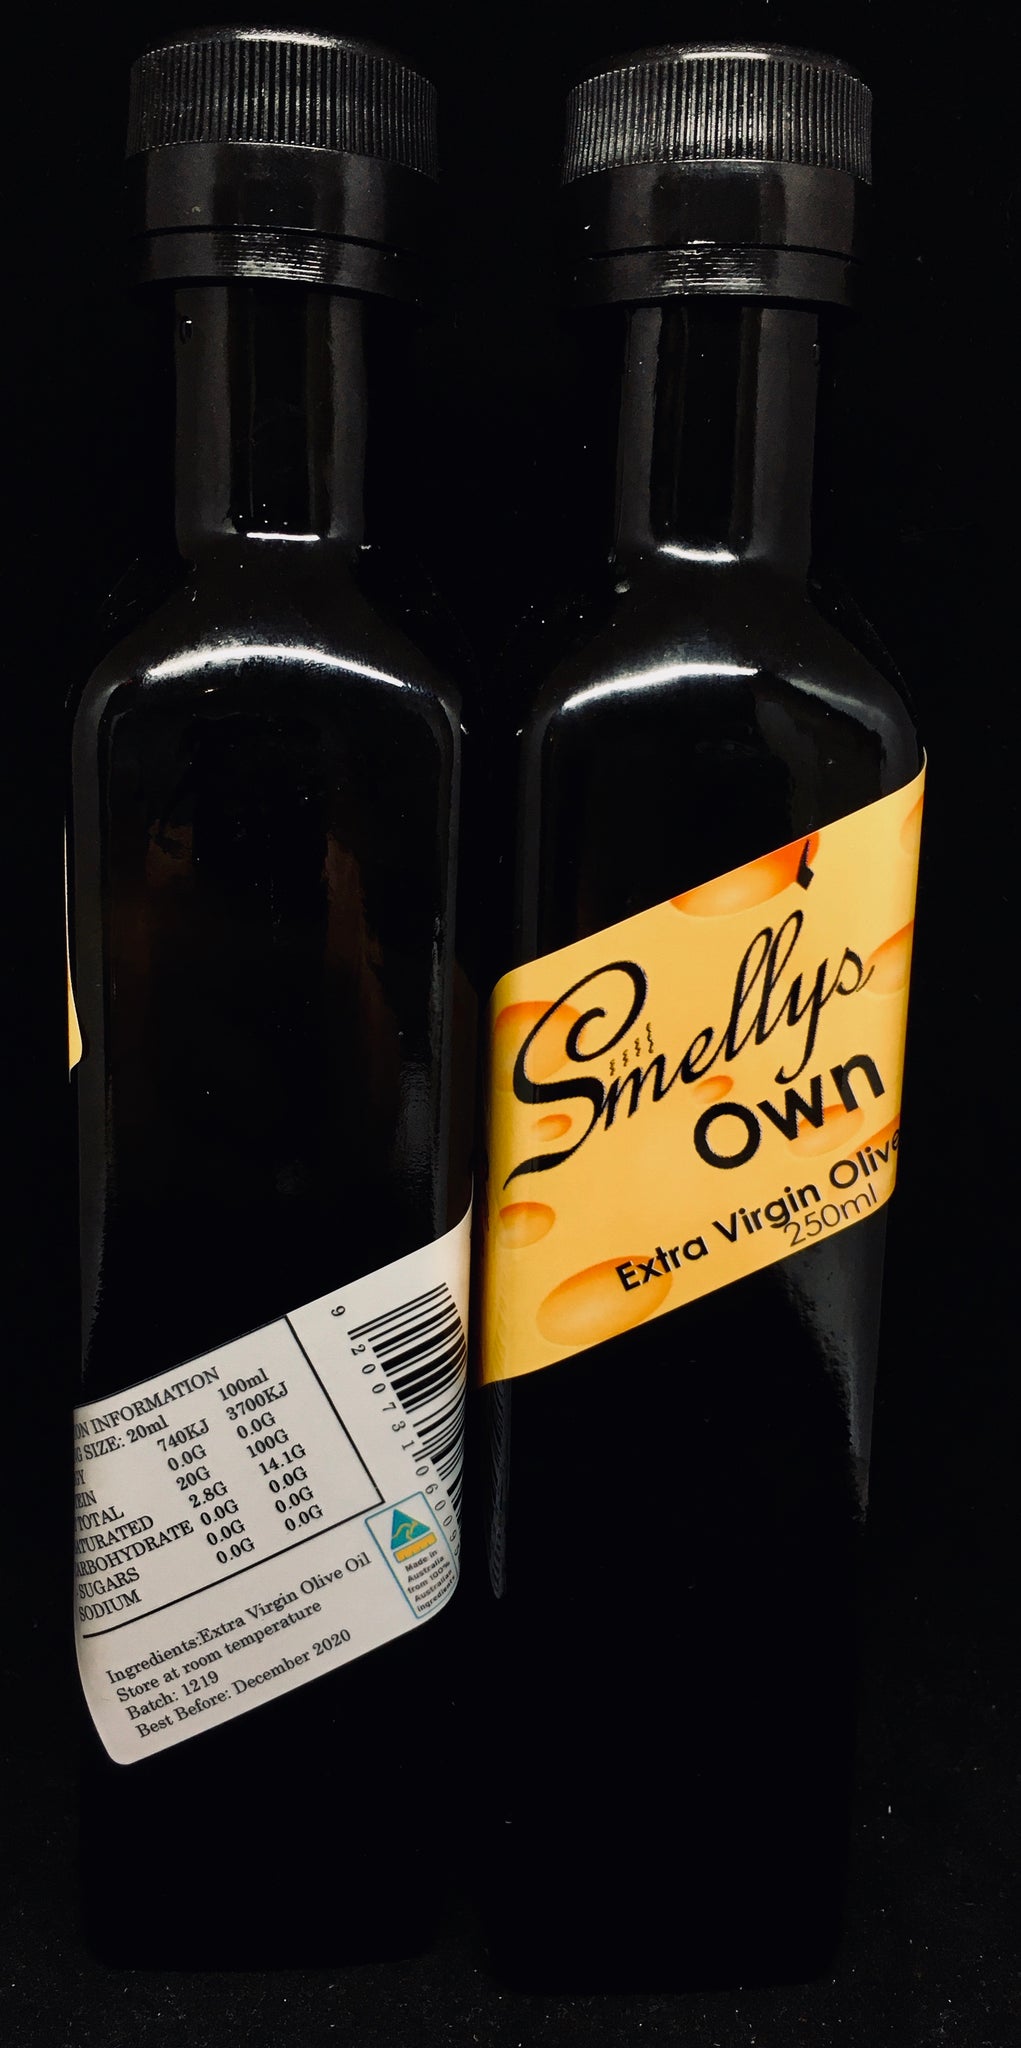 Smelly's Own - Extra Virgin Olive Oil